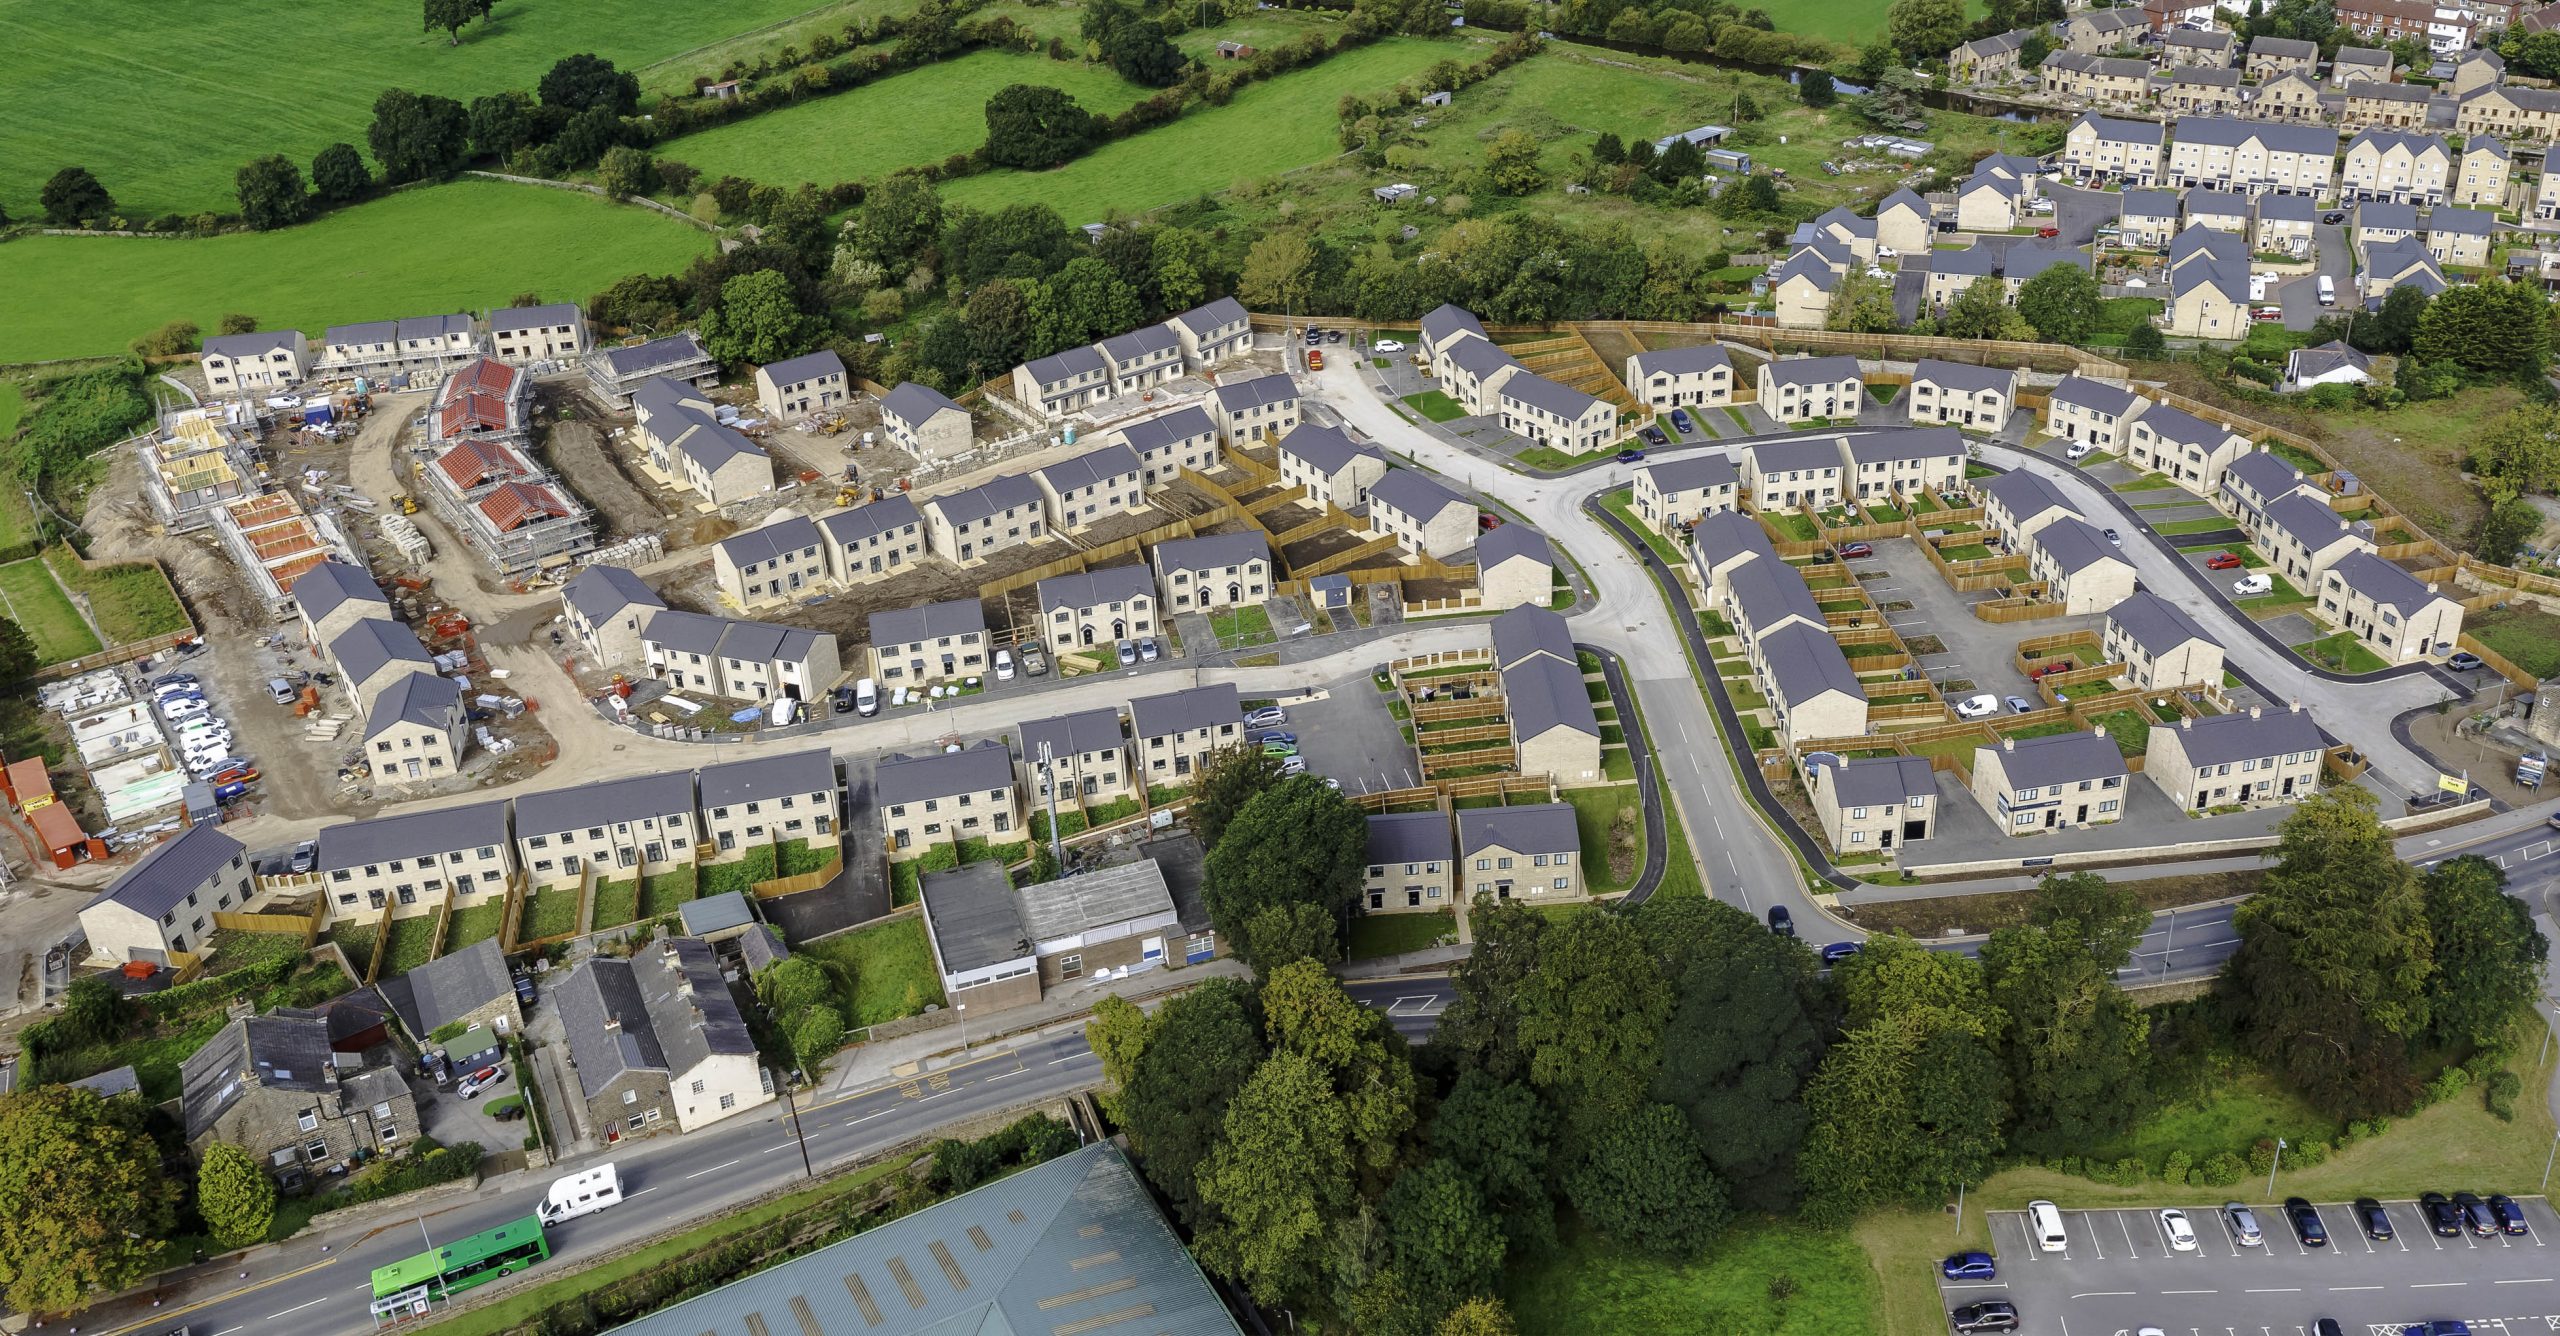 58 new affordable homes to be handed over to Yorkshire Housing on award winning site